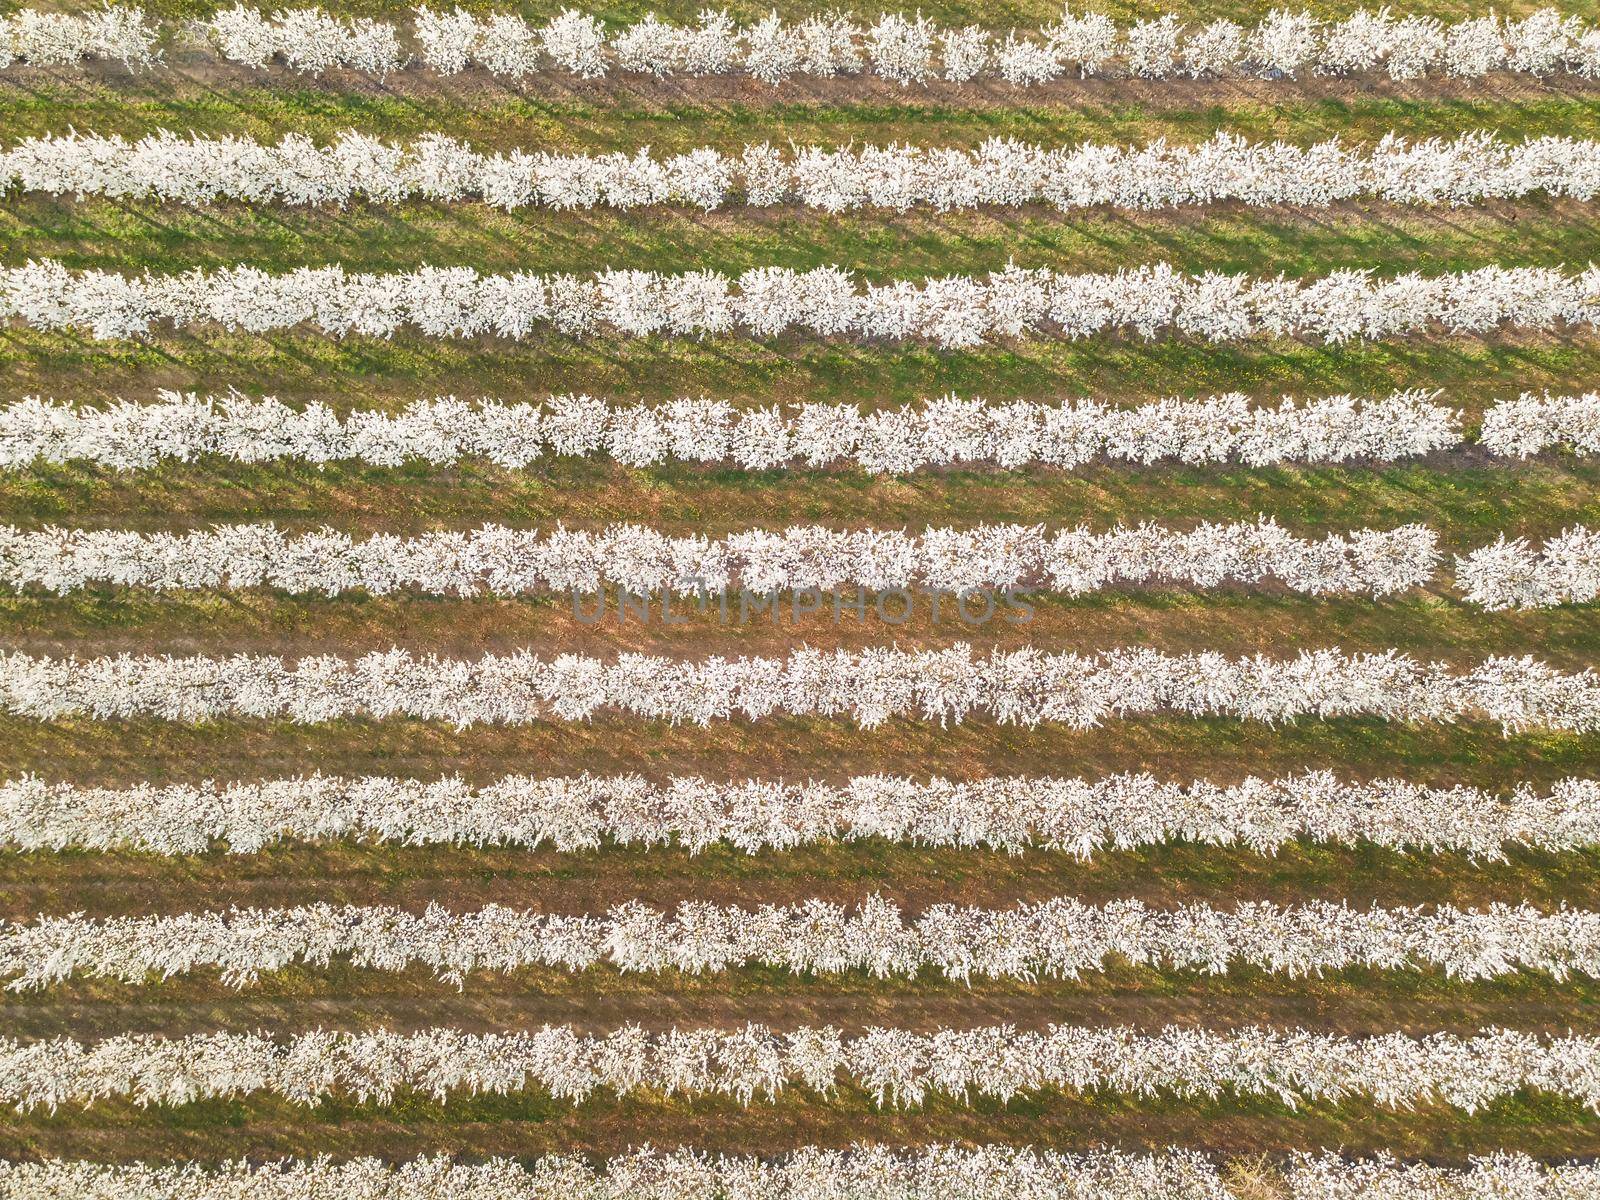 Rows of cherry trees in an orchard in spring, aerial view by Slast20